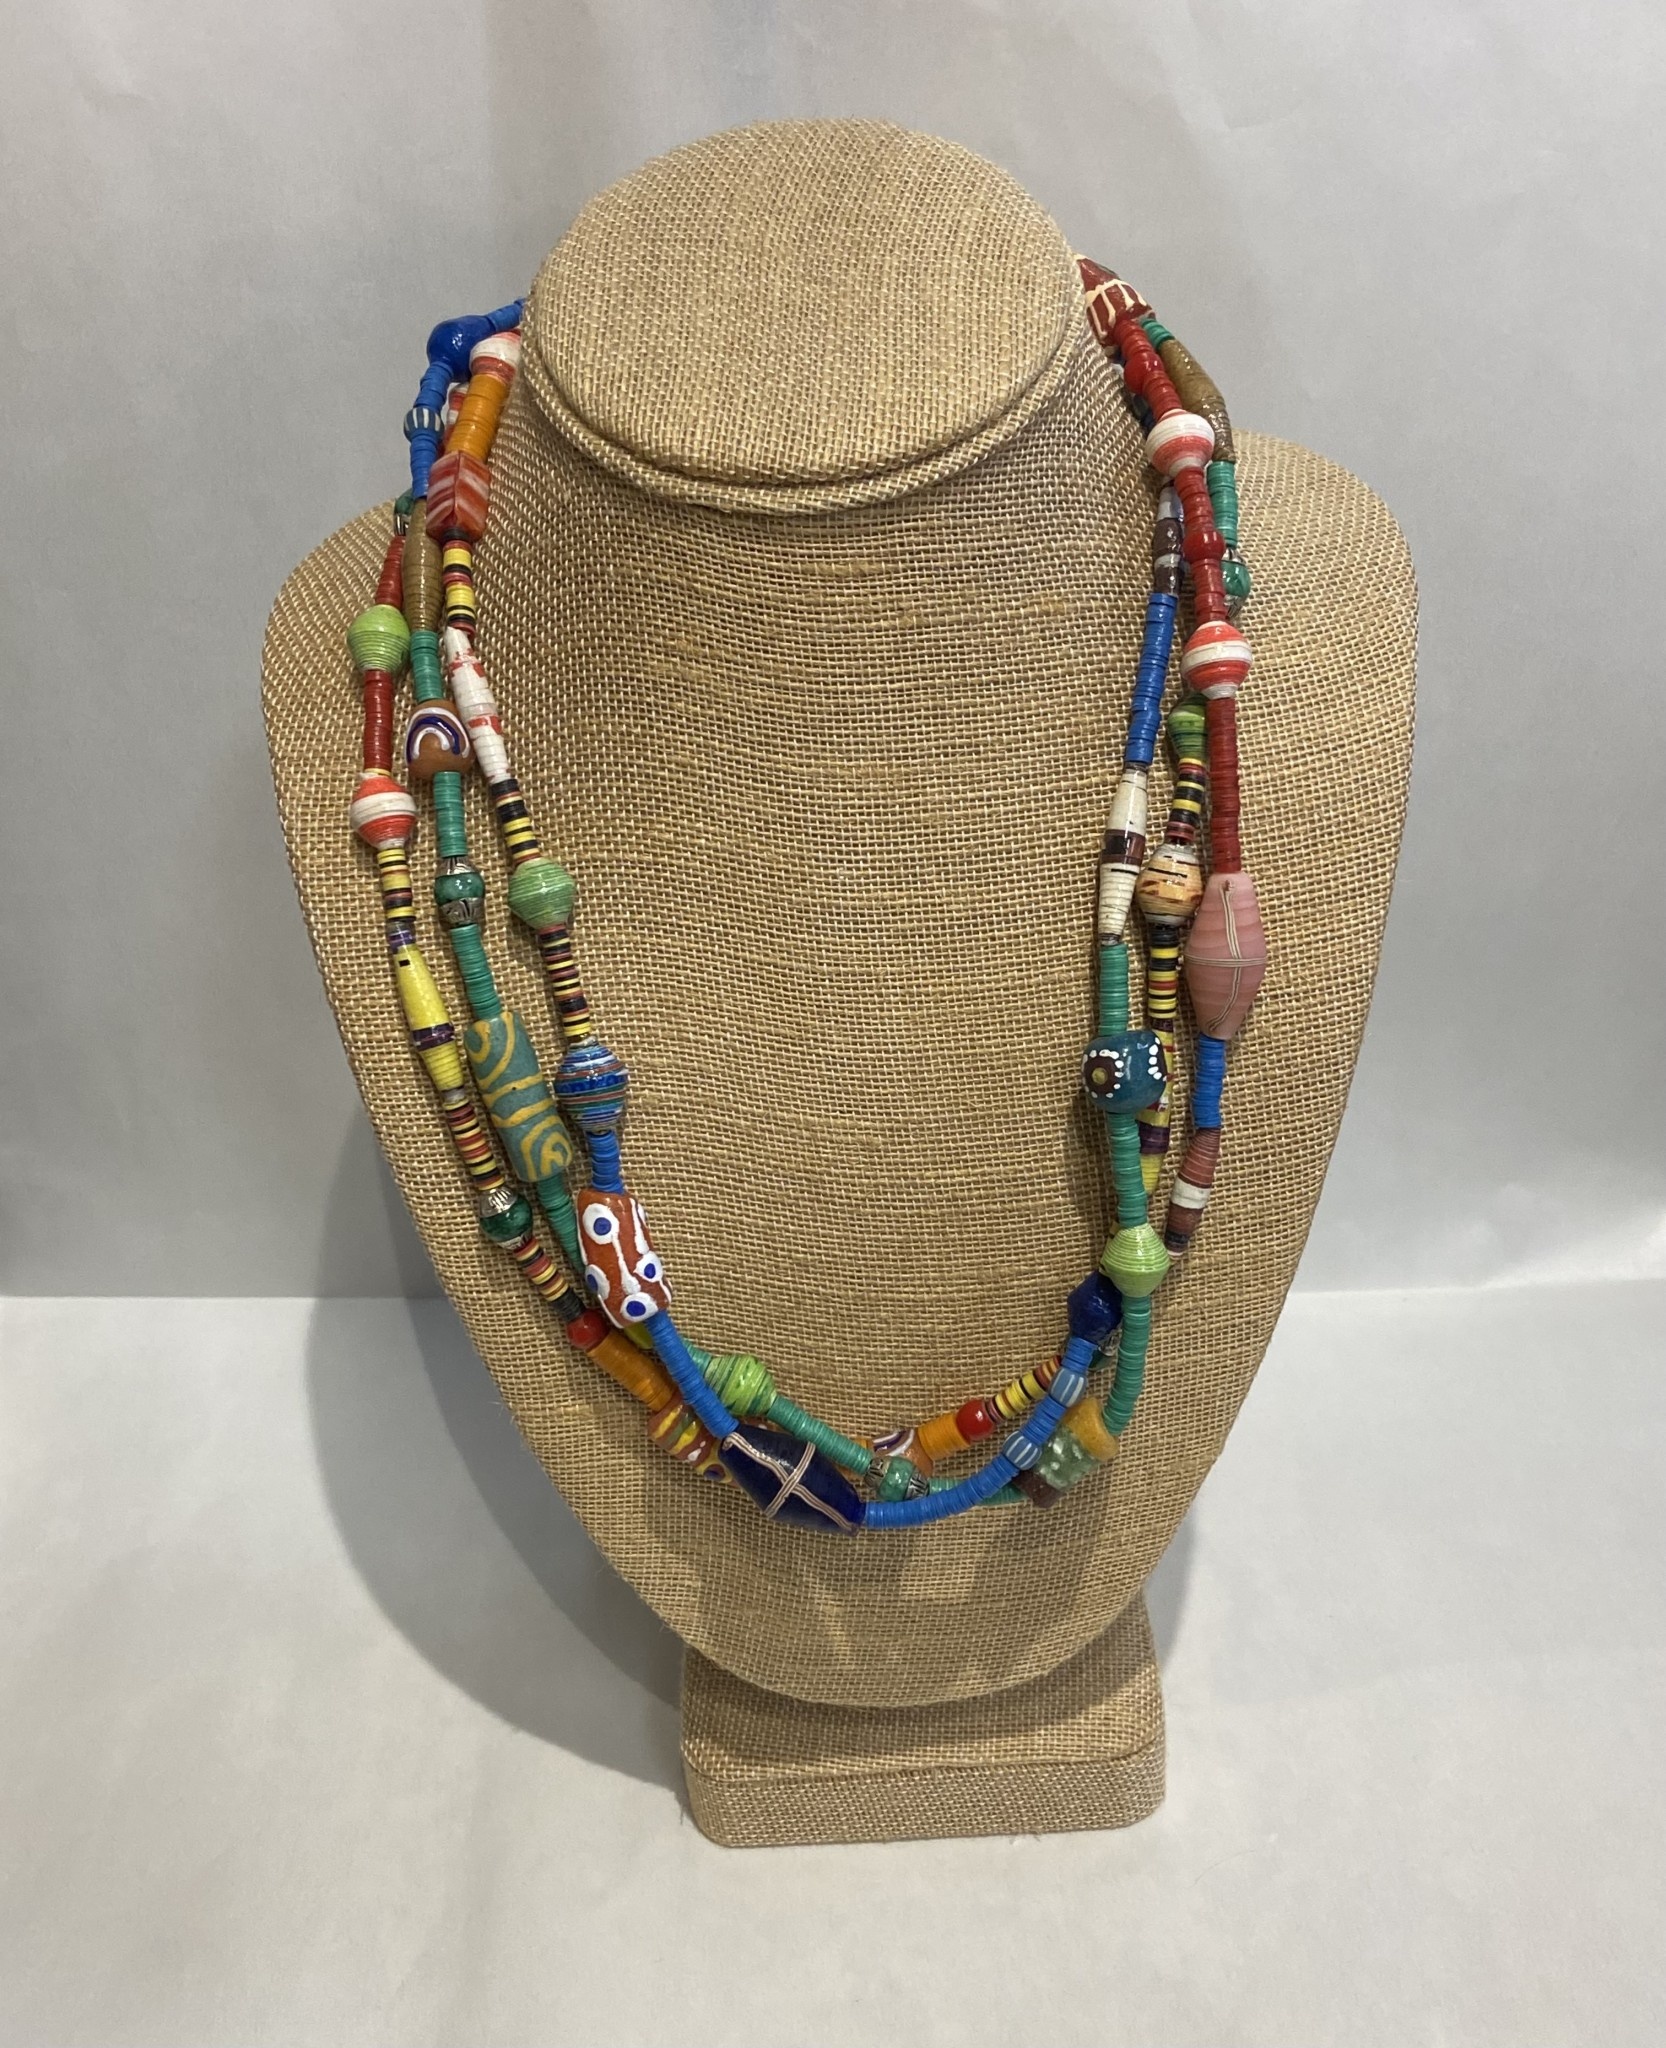 Beverly Creamer BAC 8 - Triple strand multi-color spring mix with new African glass tribal beads, handmade paper beads from Colombia and Guyana, hand-made glass beads from artisans in Hawaii and the Mainland, and connections made from old vinyl records cut into discs in